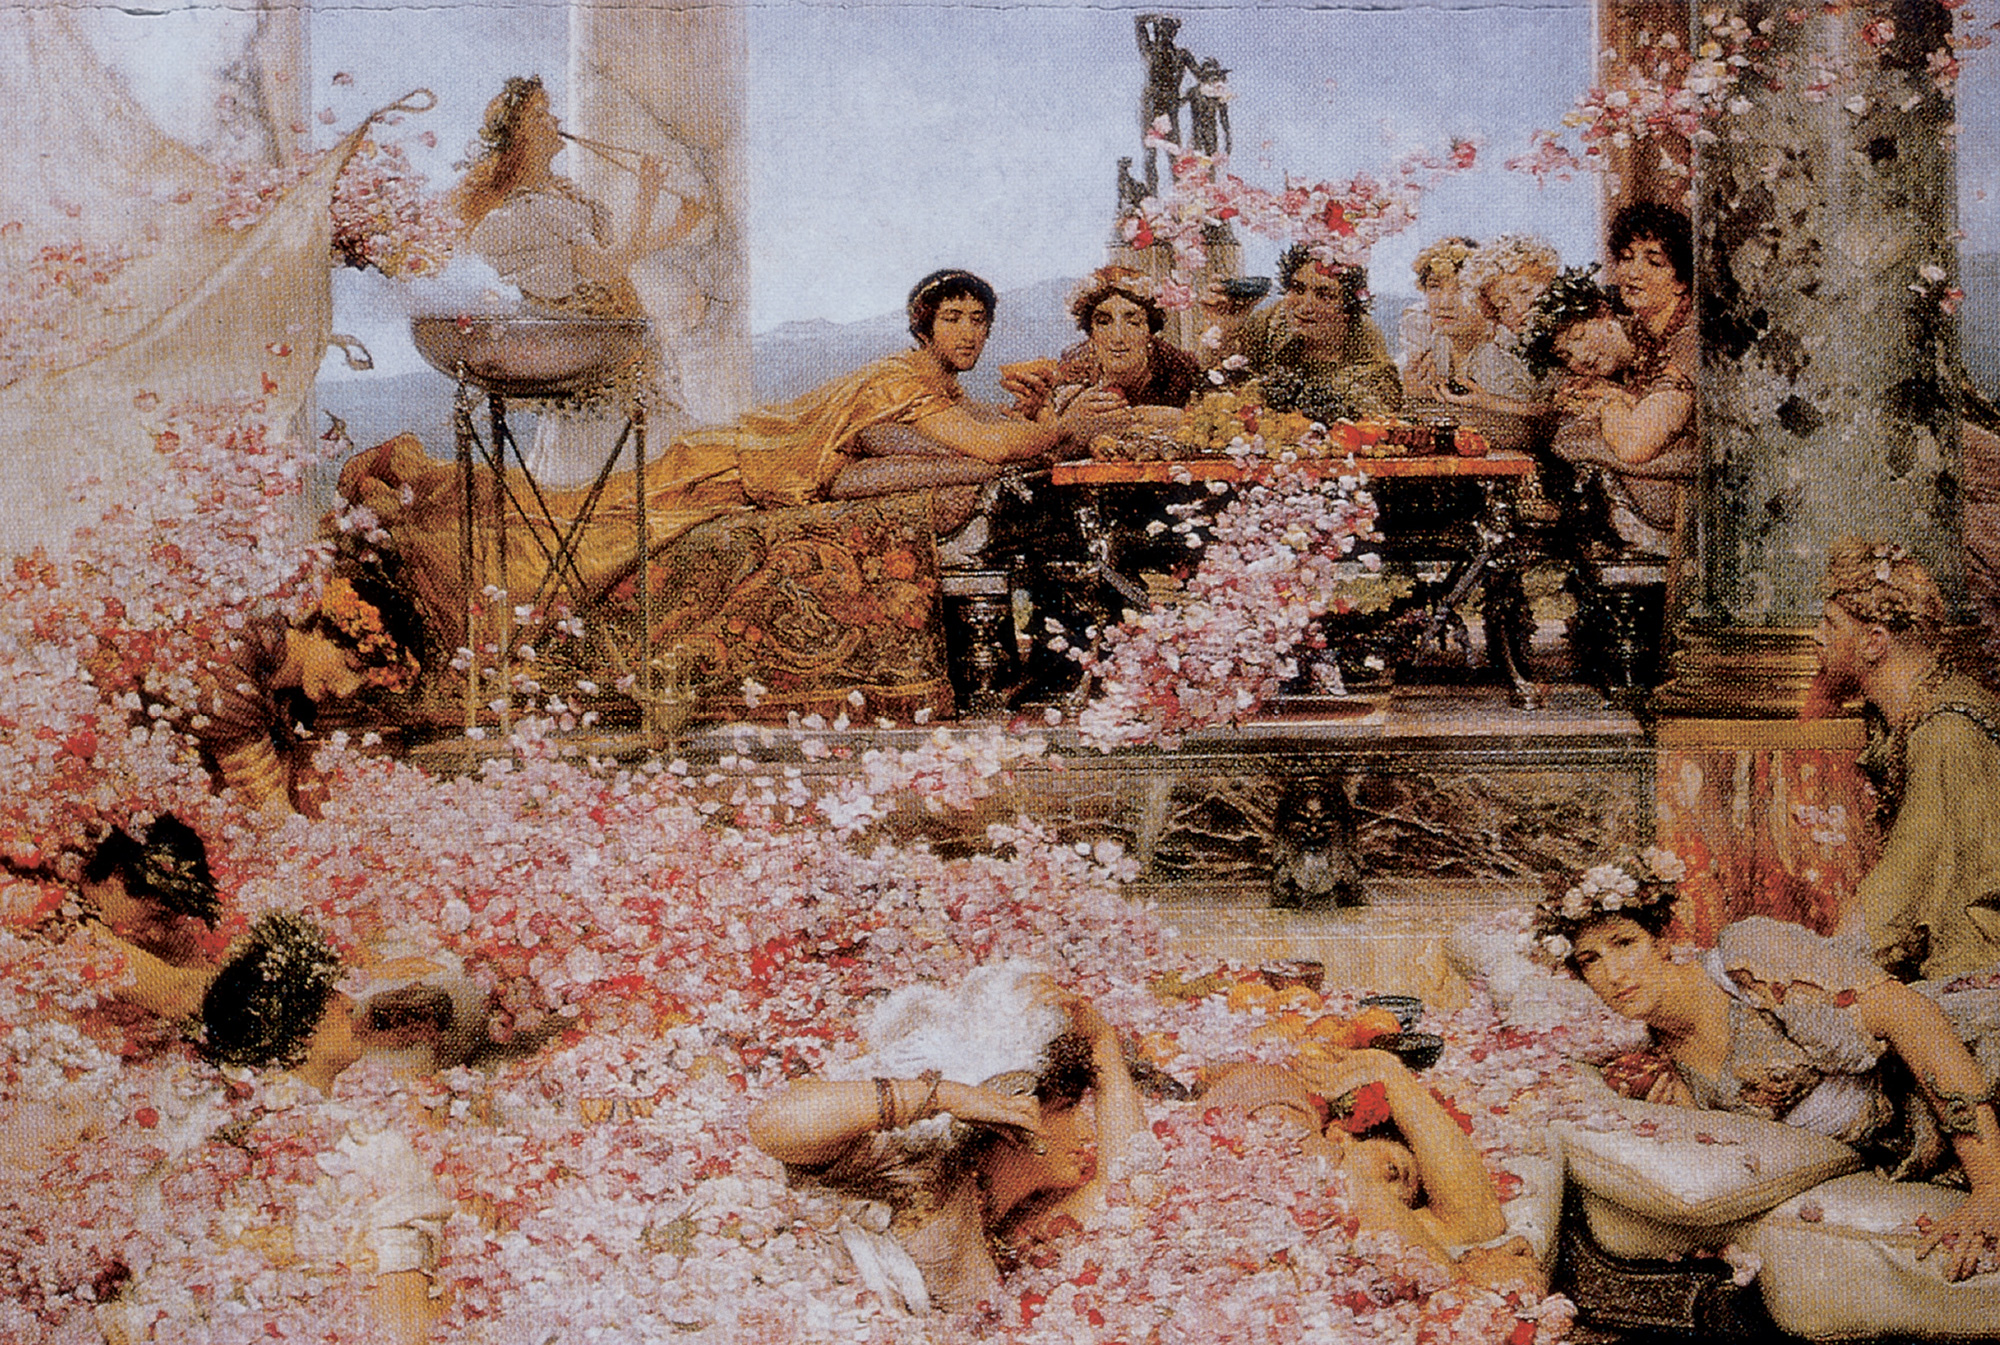 Sir Lawrence Alma Tadema, The Roses of Heliogabalus, 1888, private collection.